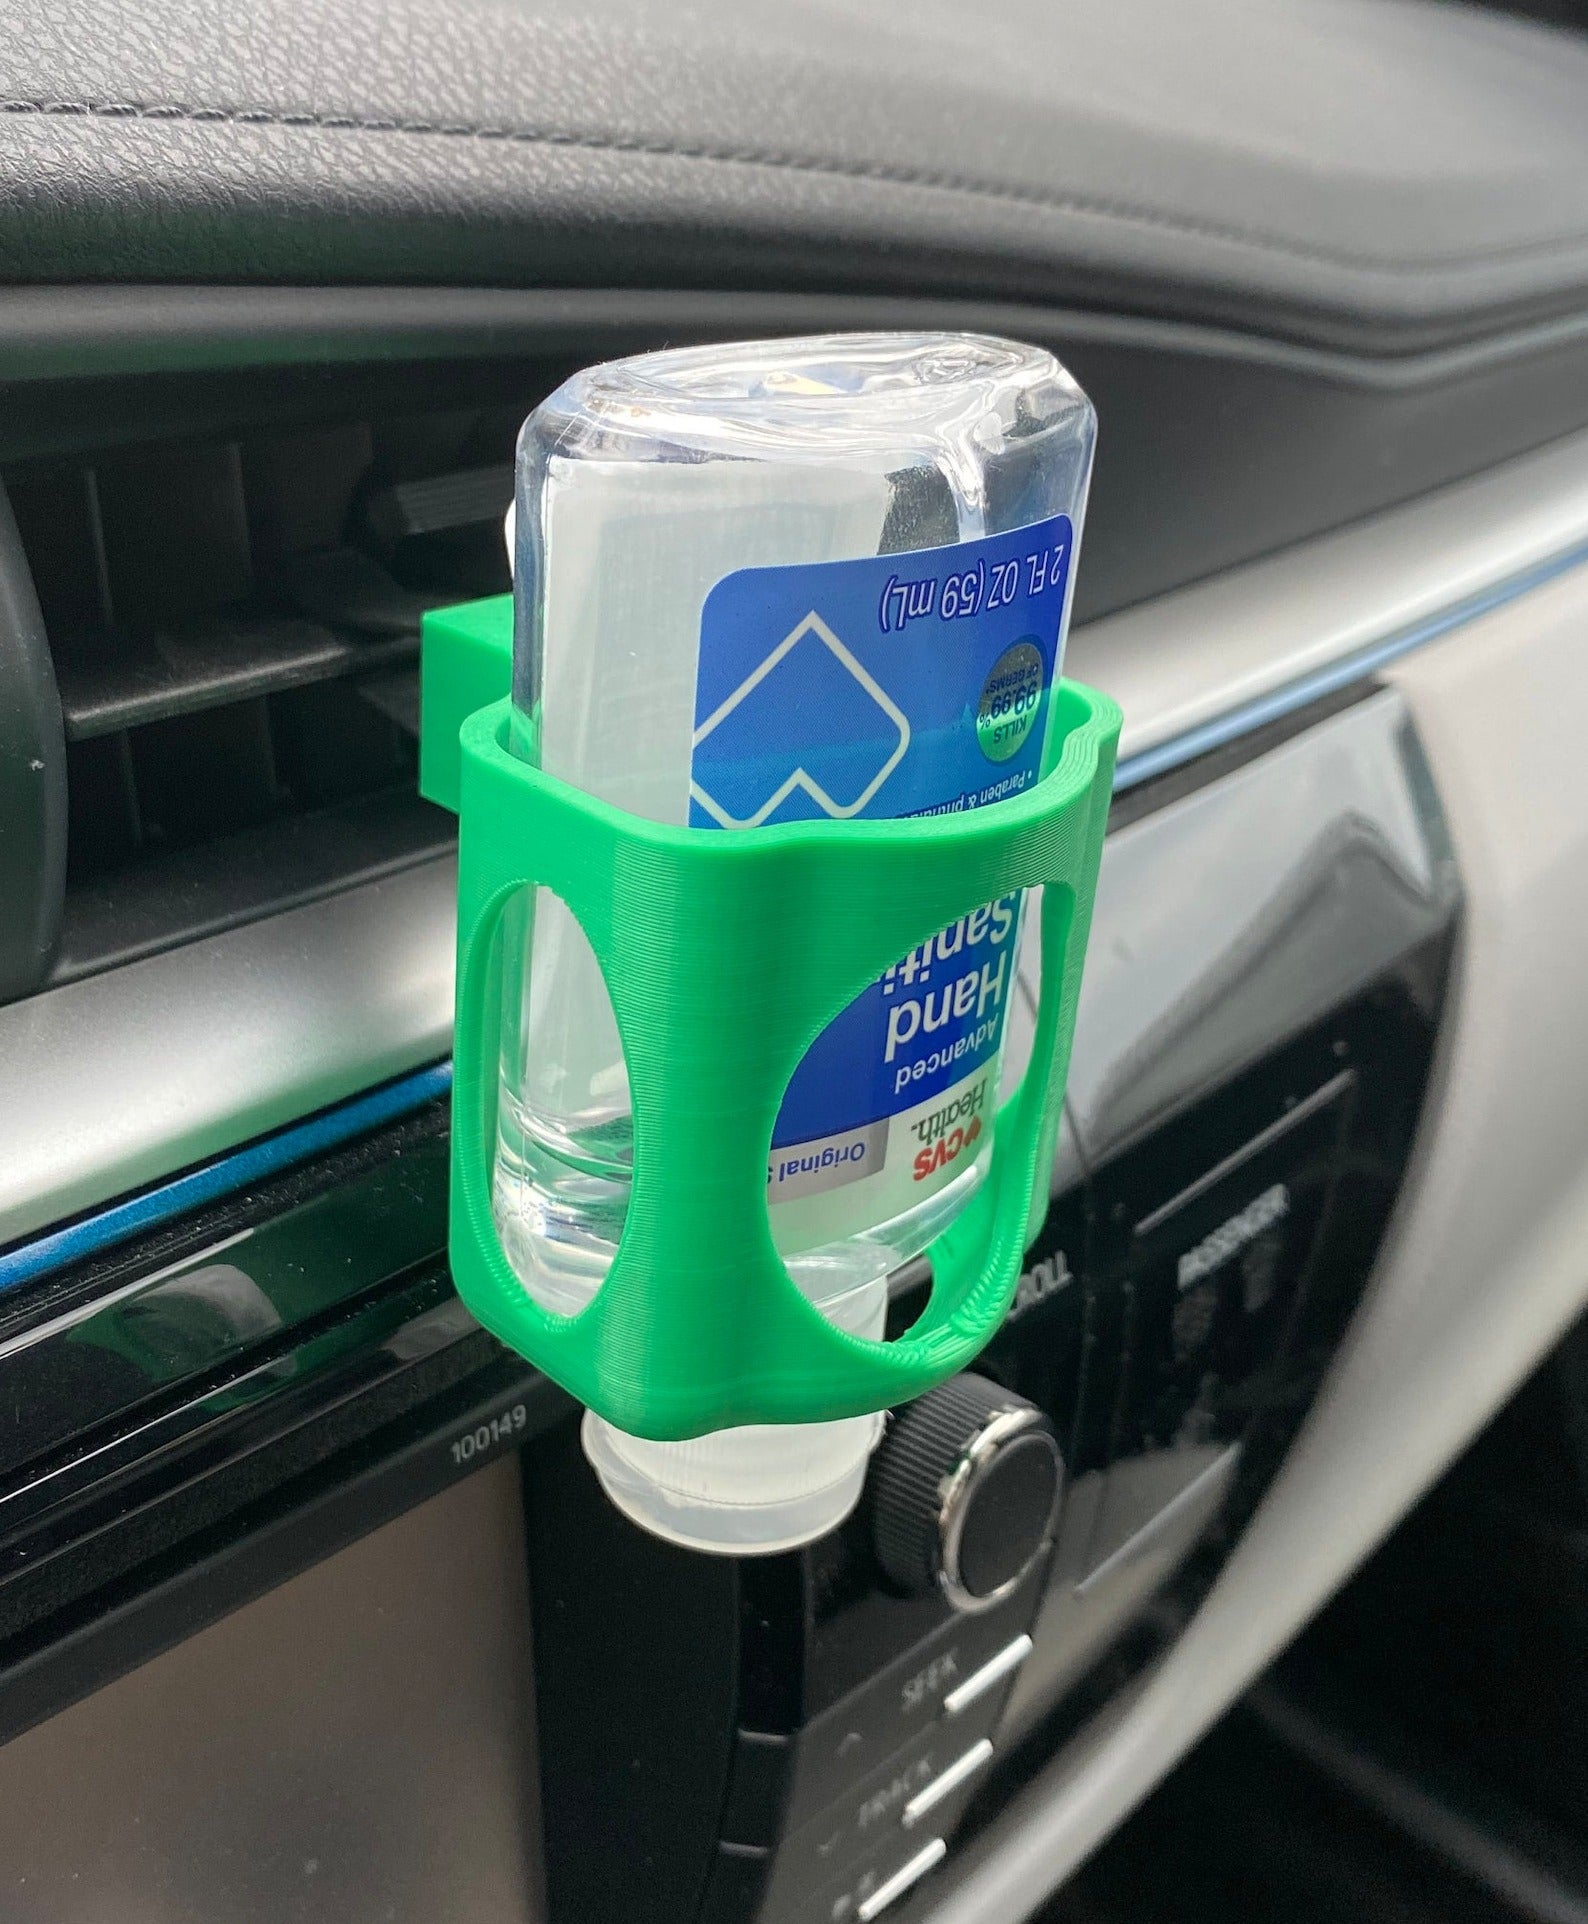 32 Products That'll Make Your Car Cleaner And More Organized Than It's Ever  Been